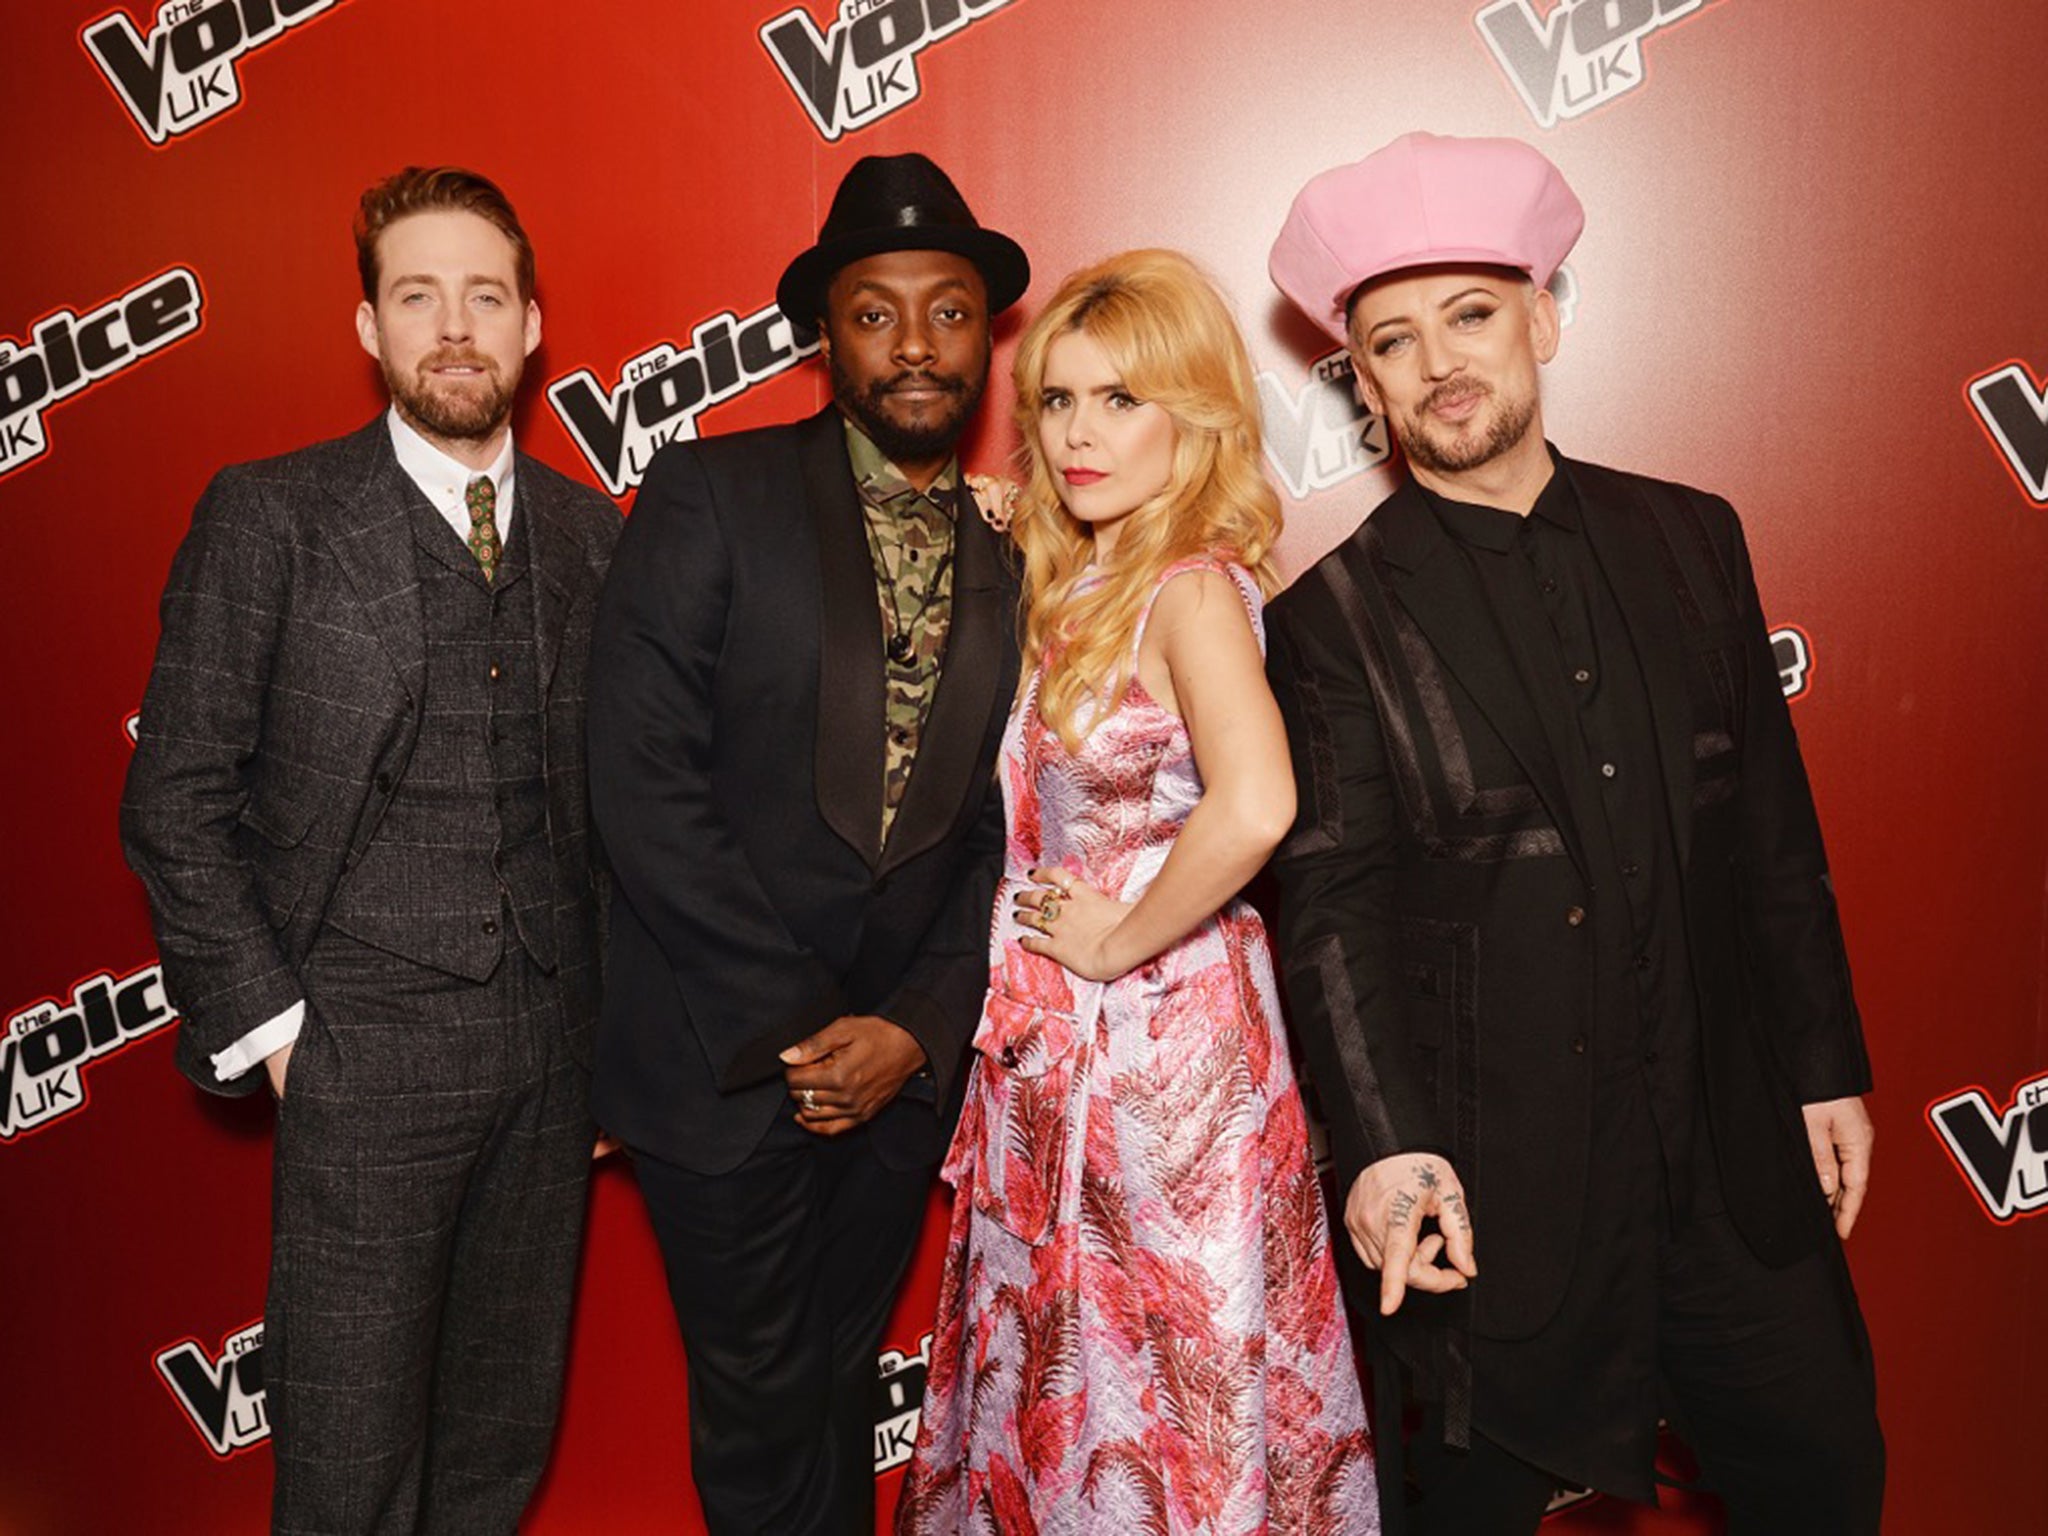 The coaches for ‘The Voice’ in 2016: Ricky Wilson, Will.i.am, Faith and Boy George